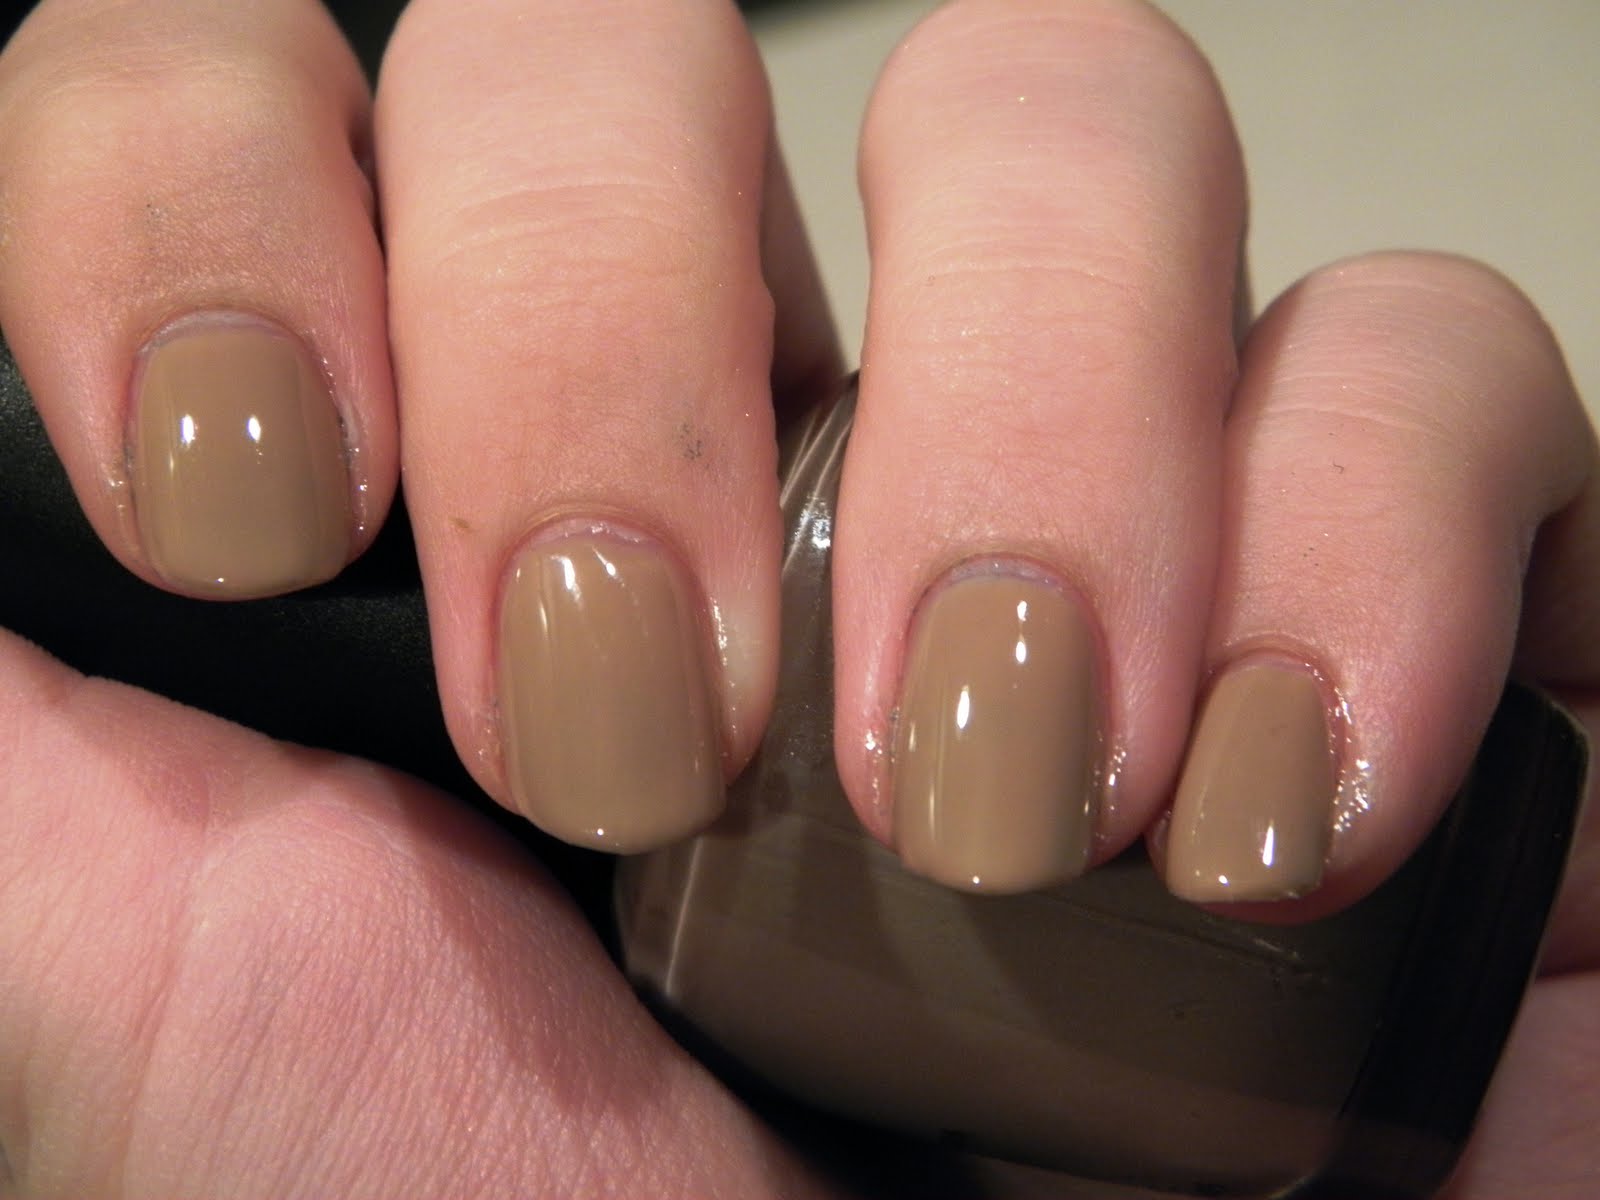 1. OPI Nail Lacquer in "Tickle My France-y" - wide 6